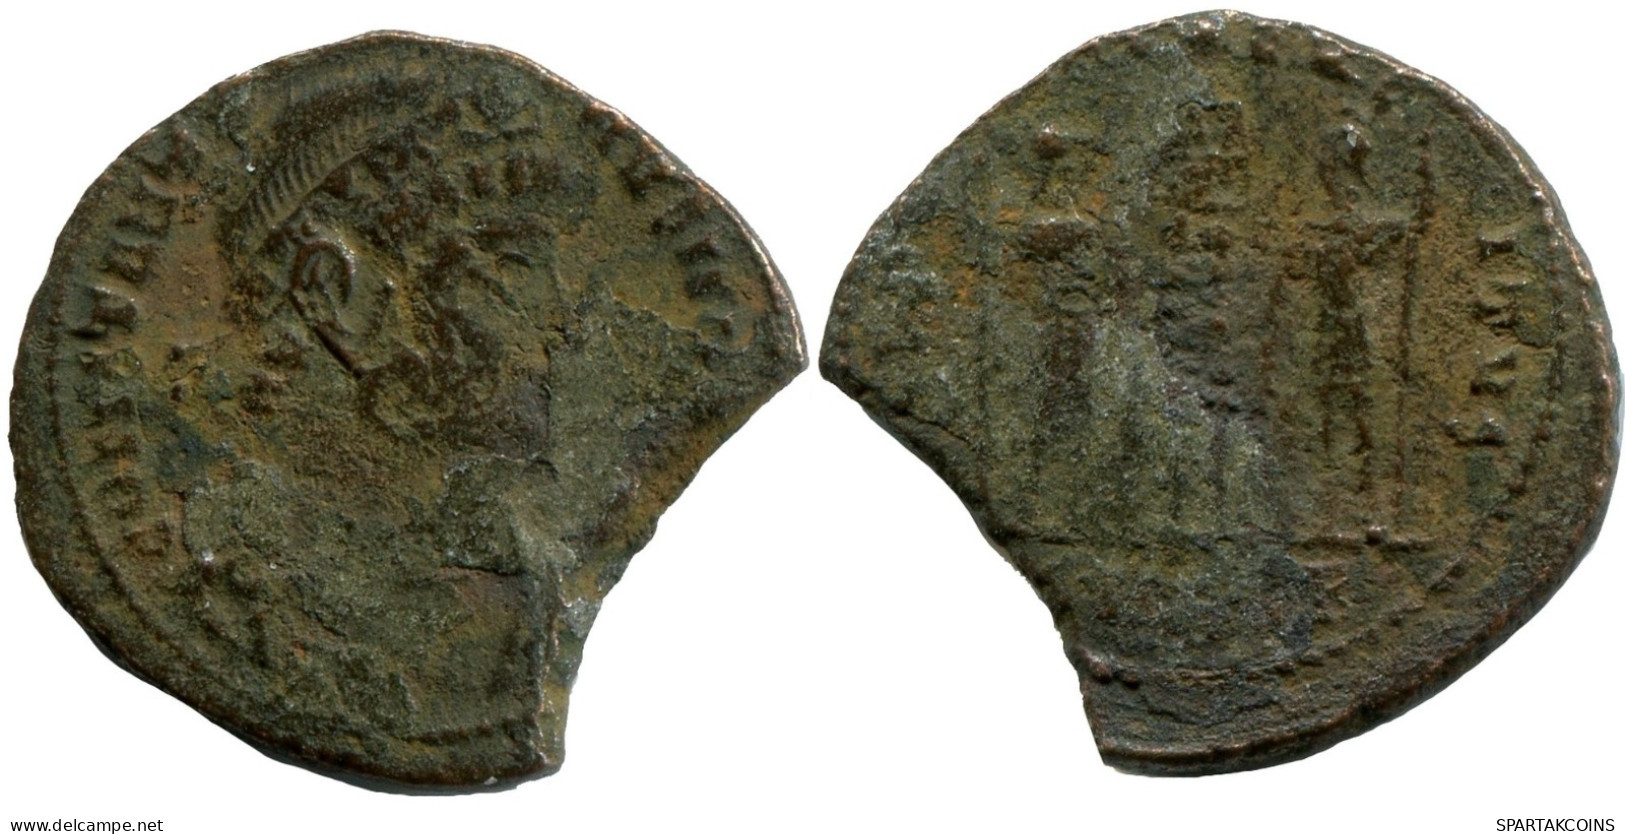 CONSTANTINE I MINTED IN ANTIOCH FOUND IN IHNASYAH HOARD EGYPT #ANC10643.14.E.A - The Christian Empire (307 AD To 363 AD)